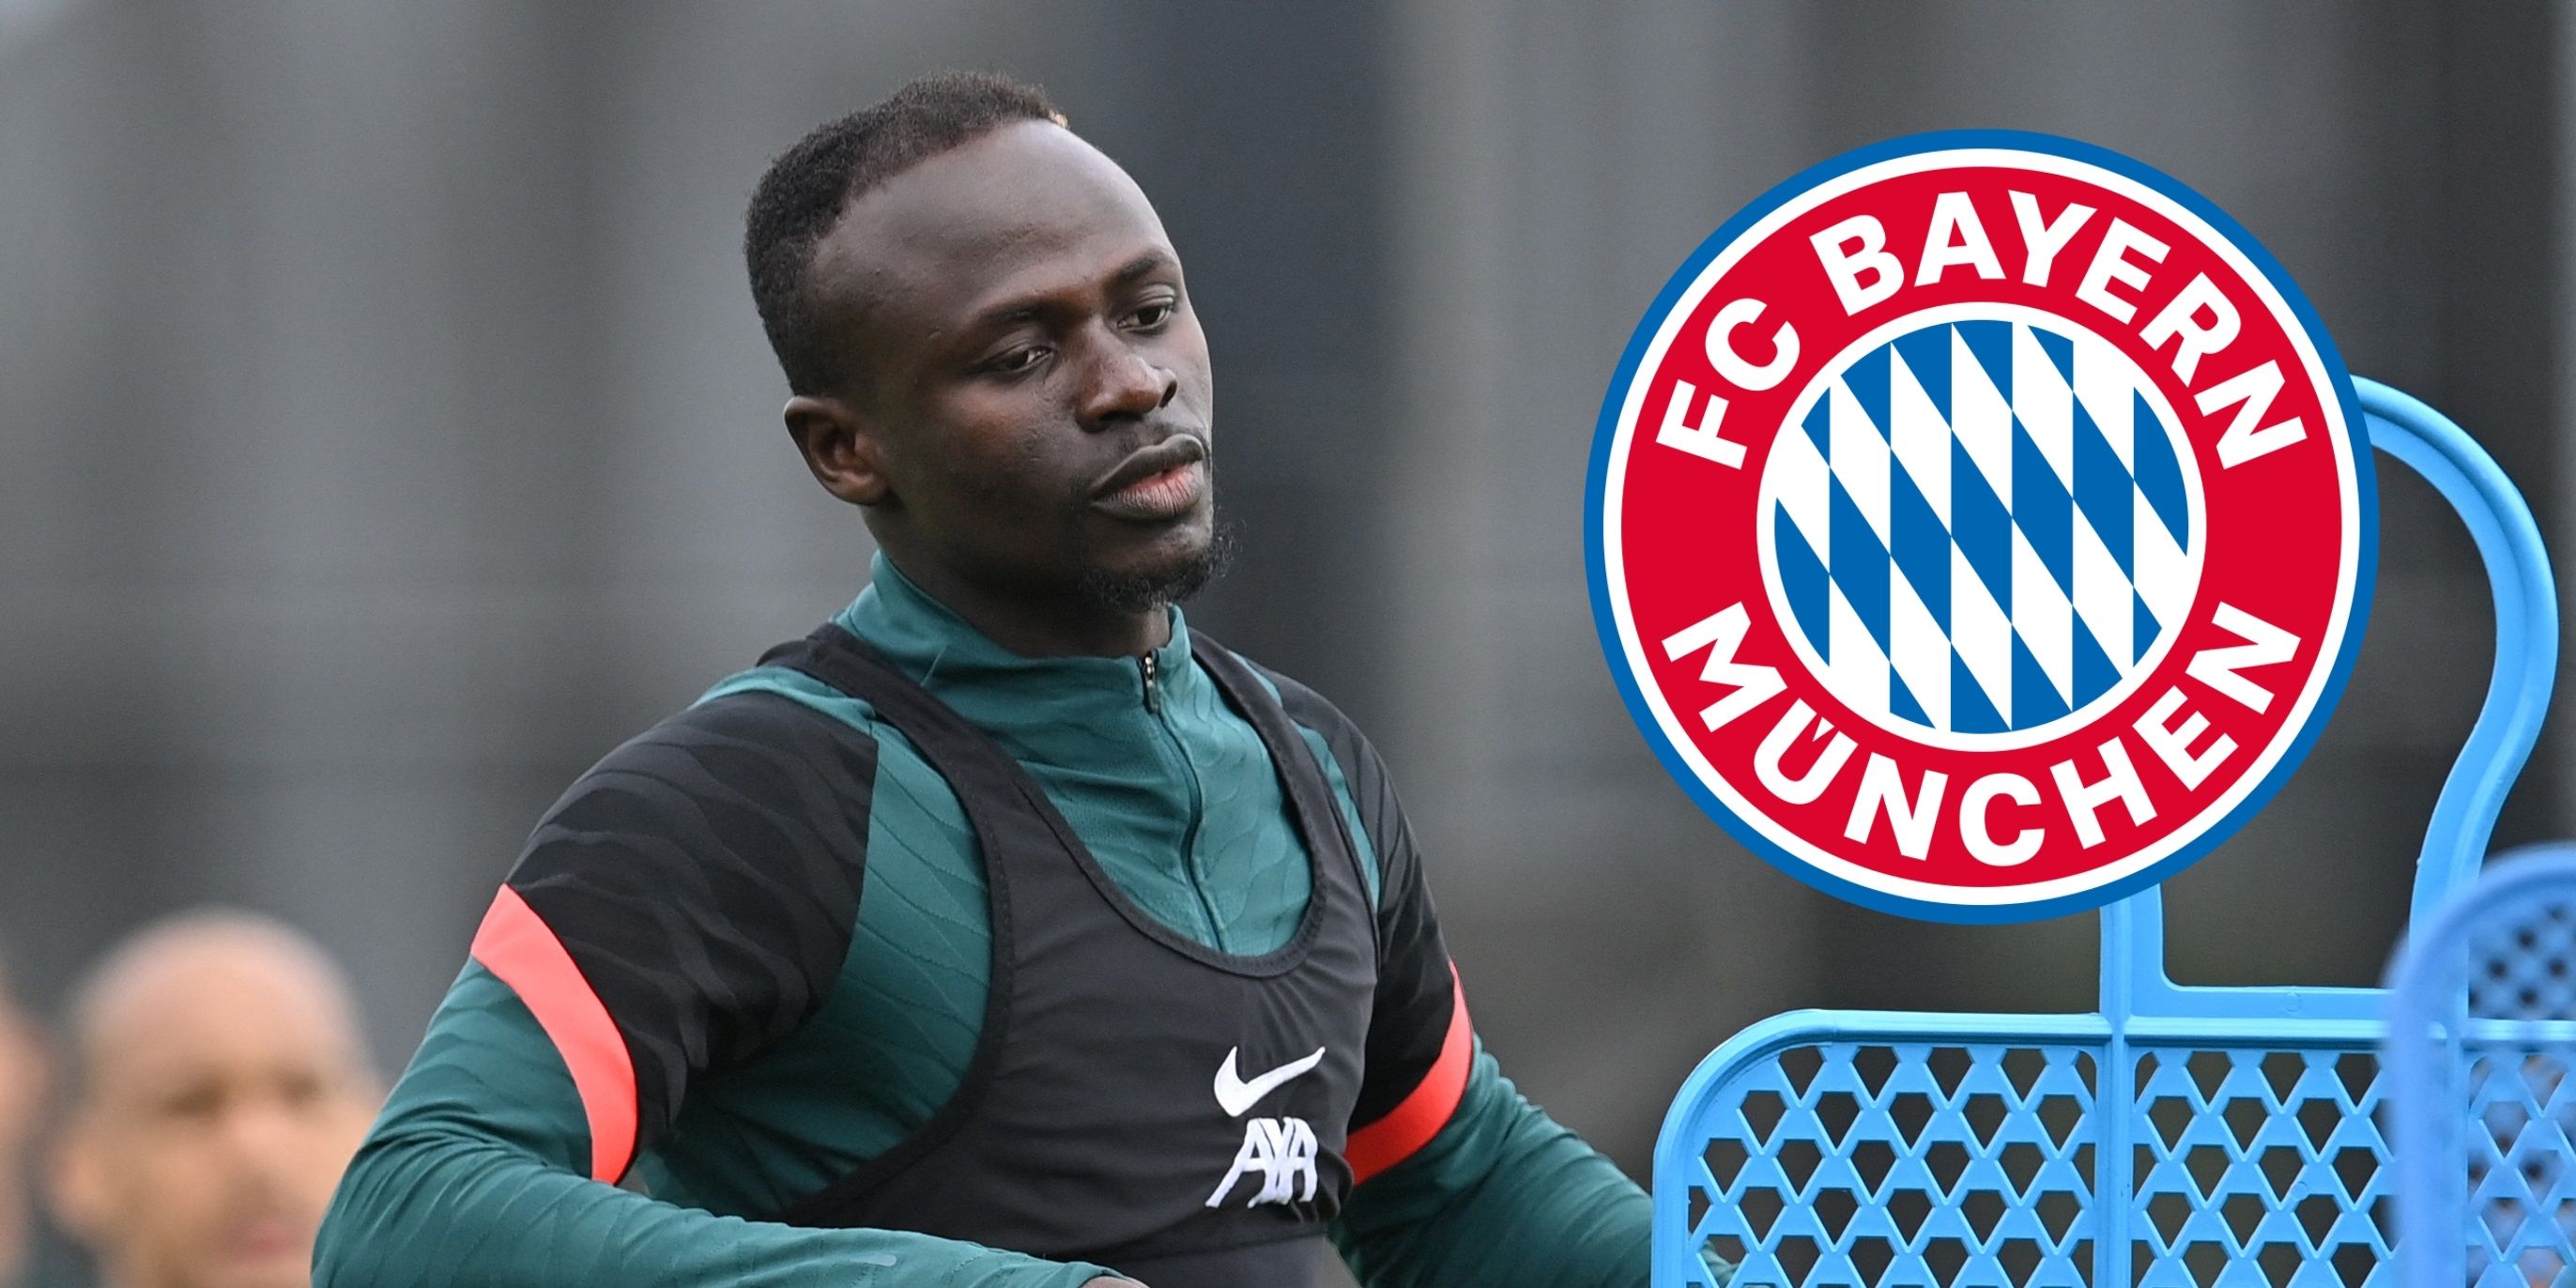 Mane decides to leave Liverpool amid heavy Bayern transfer links; German champions can offer him something Reds can’t – SPORT1